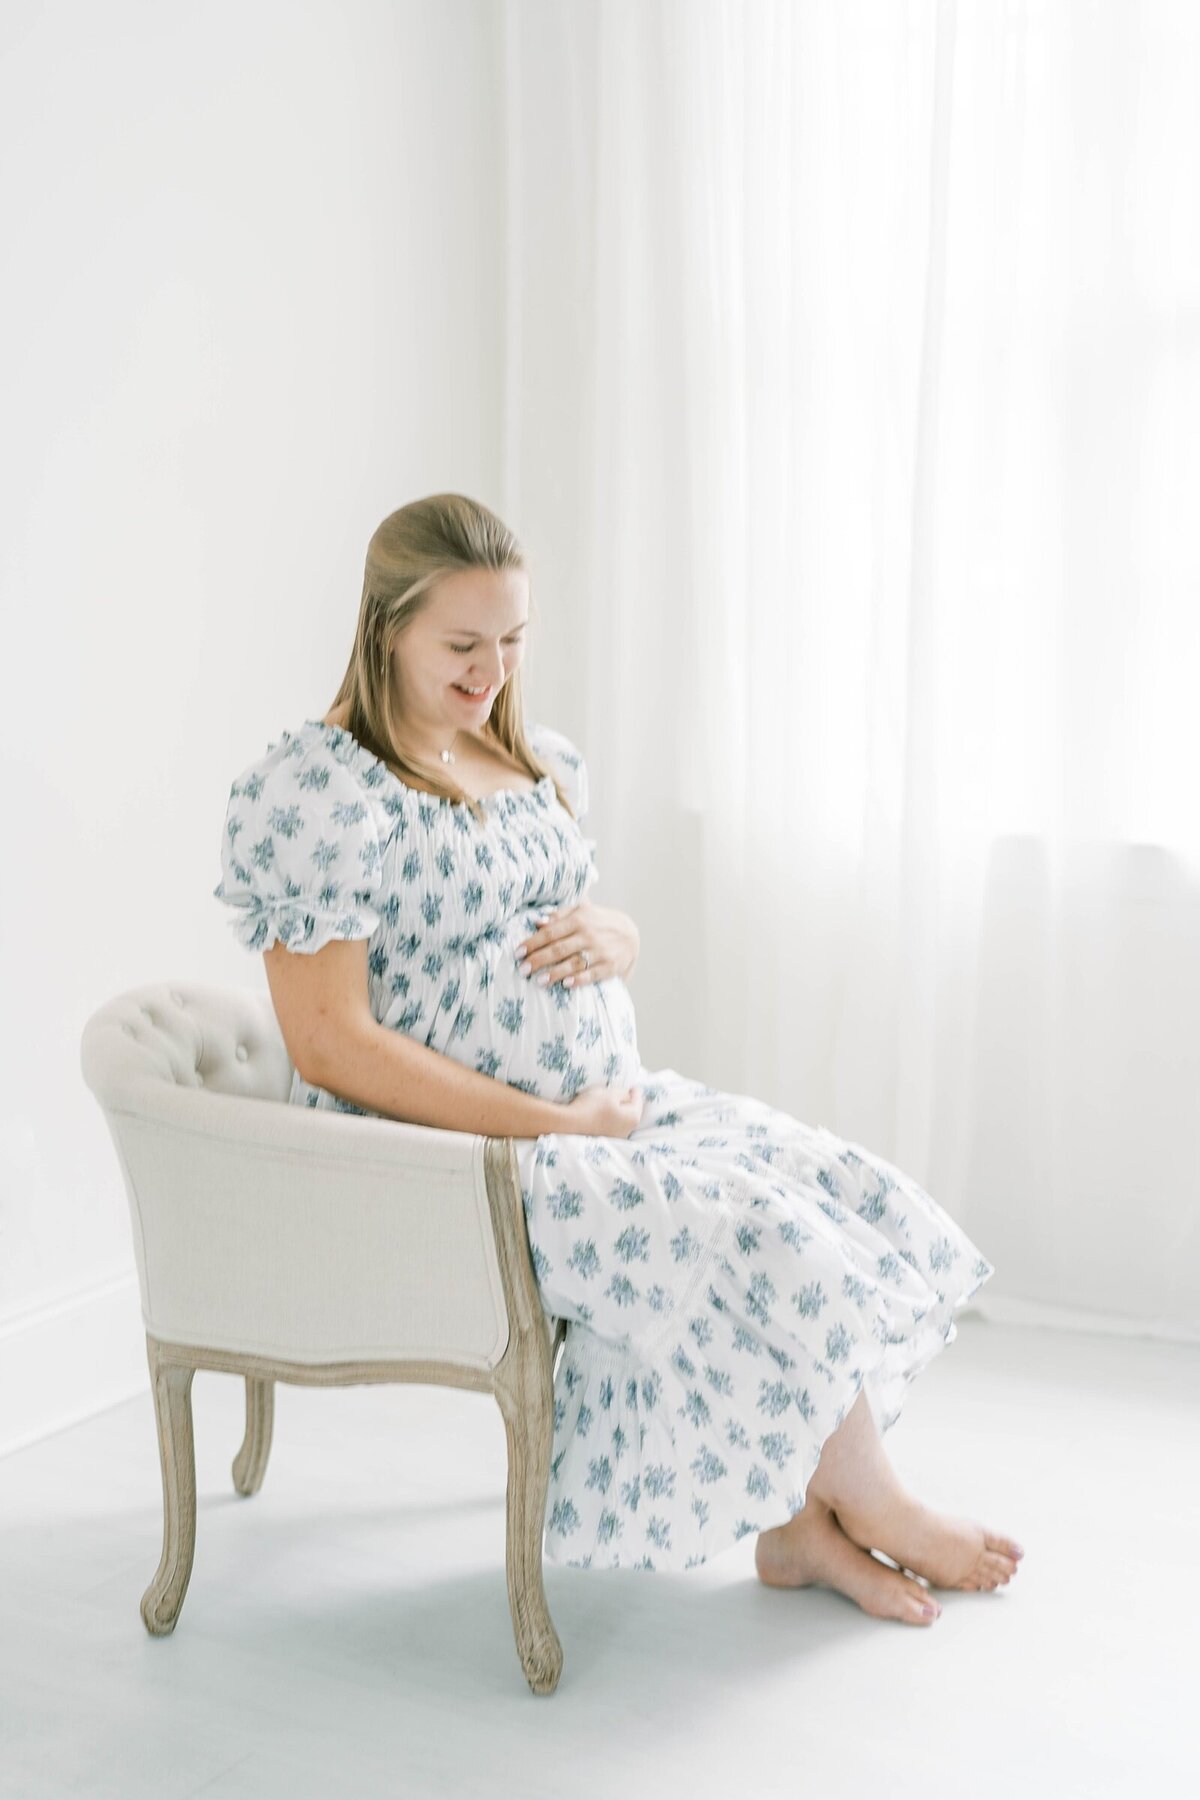 Roswell Maternity Photographer_0093